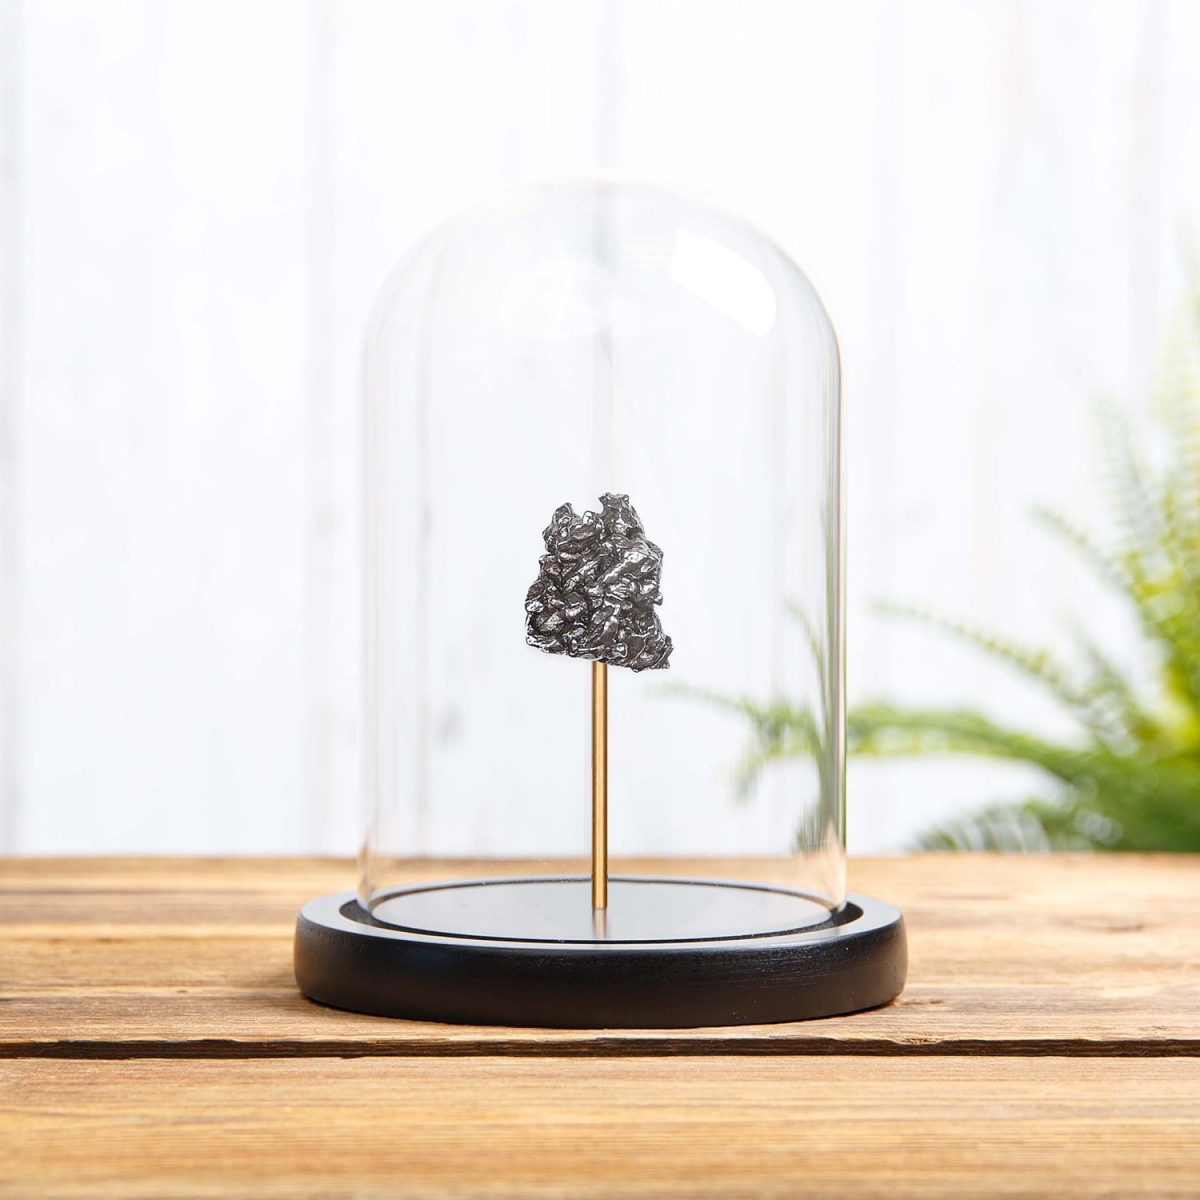 Minibeast Campo del Cielo Meteorite in Glass Dome with Wooden base